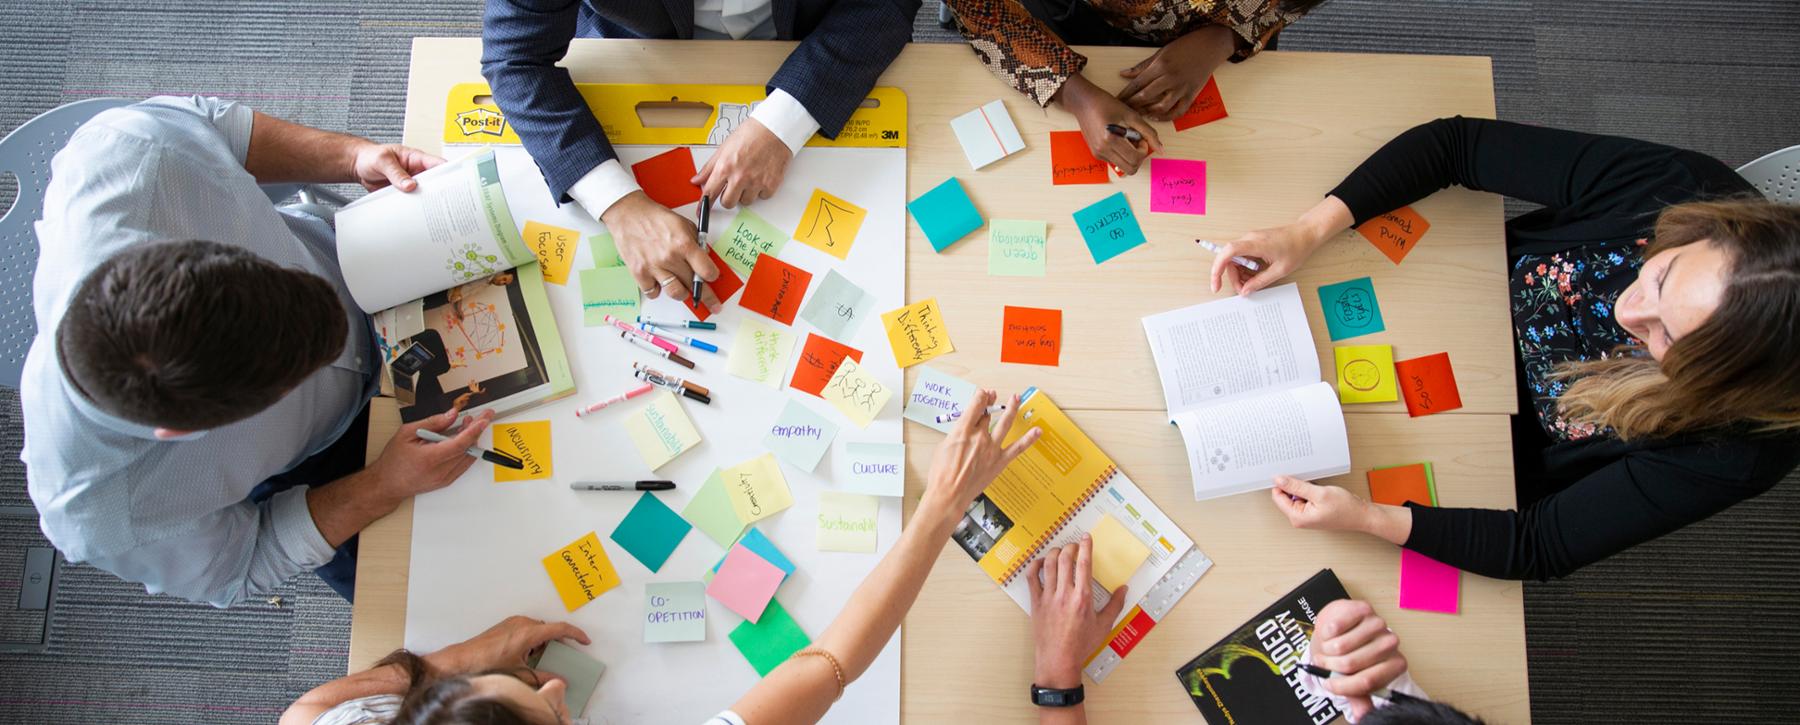 A group of people sit around a table brainstorming with post-it notes, paper, and markers.